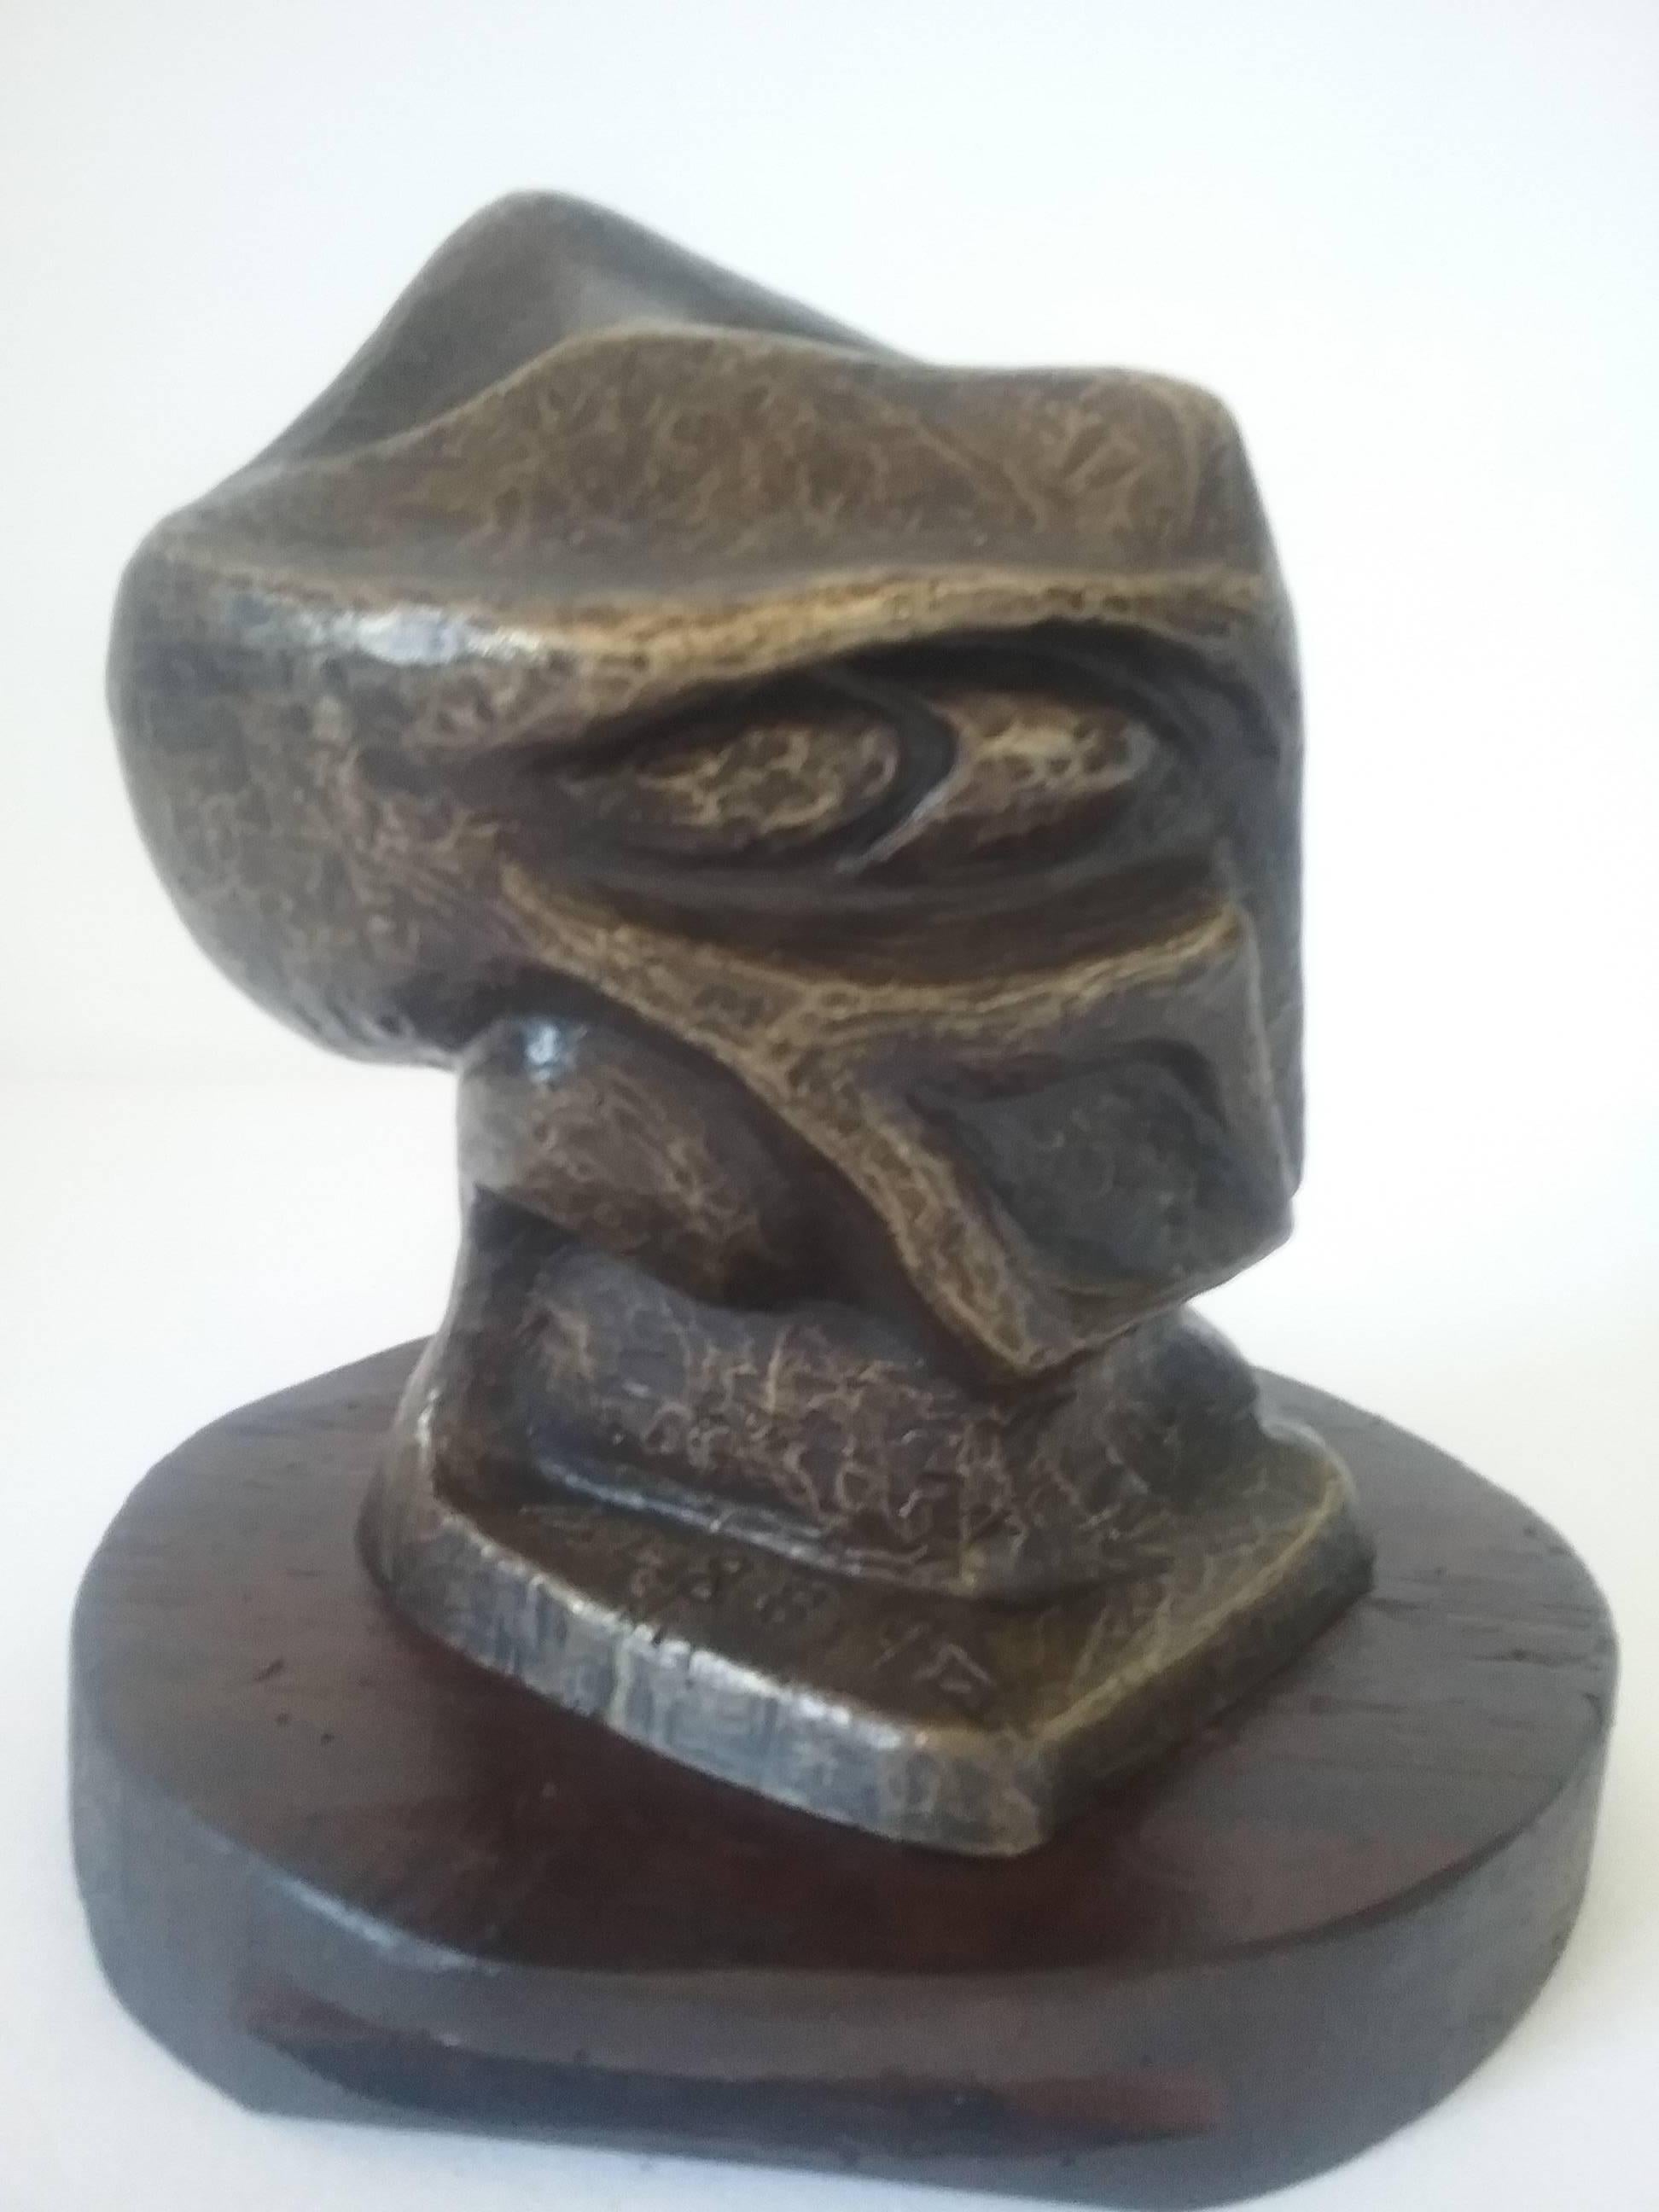 An interesting modernism bronze sculpture on an old wooden base.
Perhaps in form of a stylized head
Marked G L 88 1/2
The sculptor is not identified but it's a very qualitative work
In original condition, bronze has a beautiful